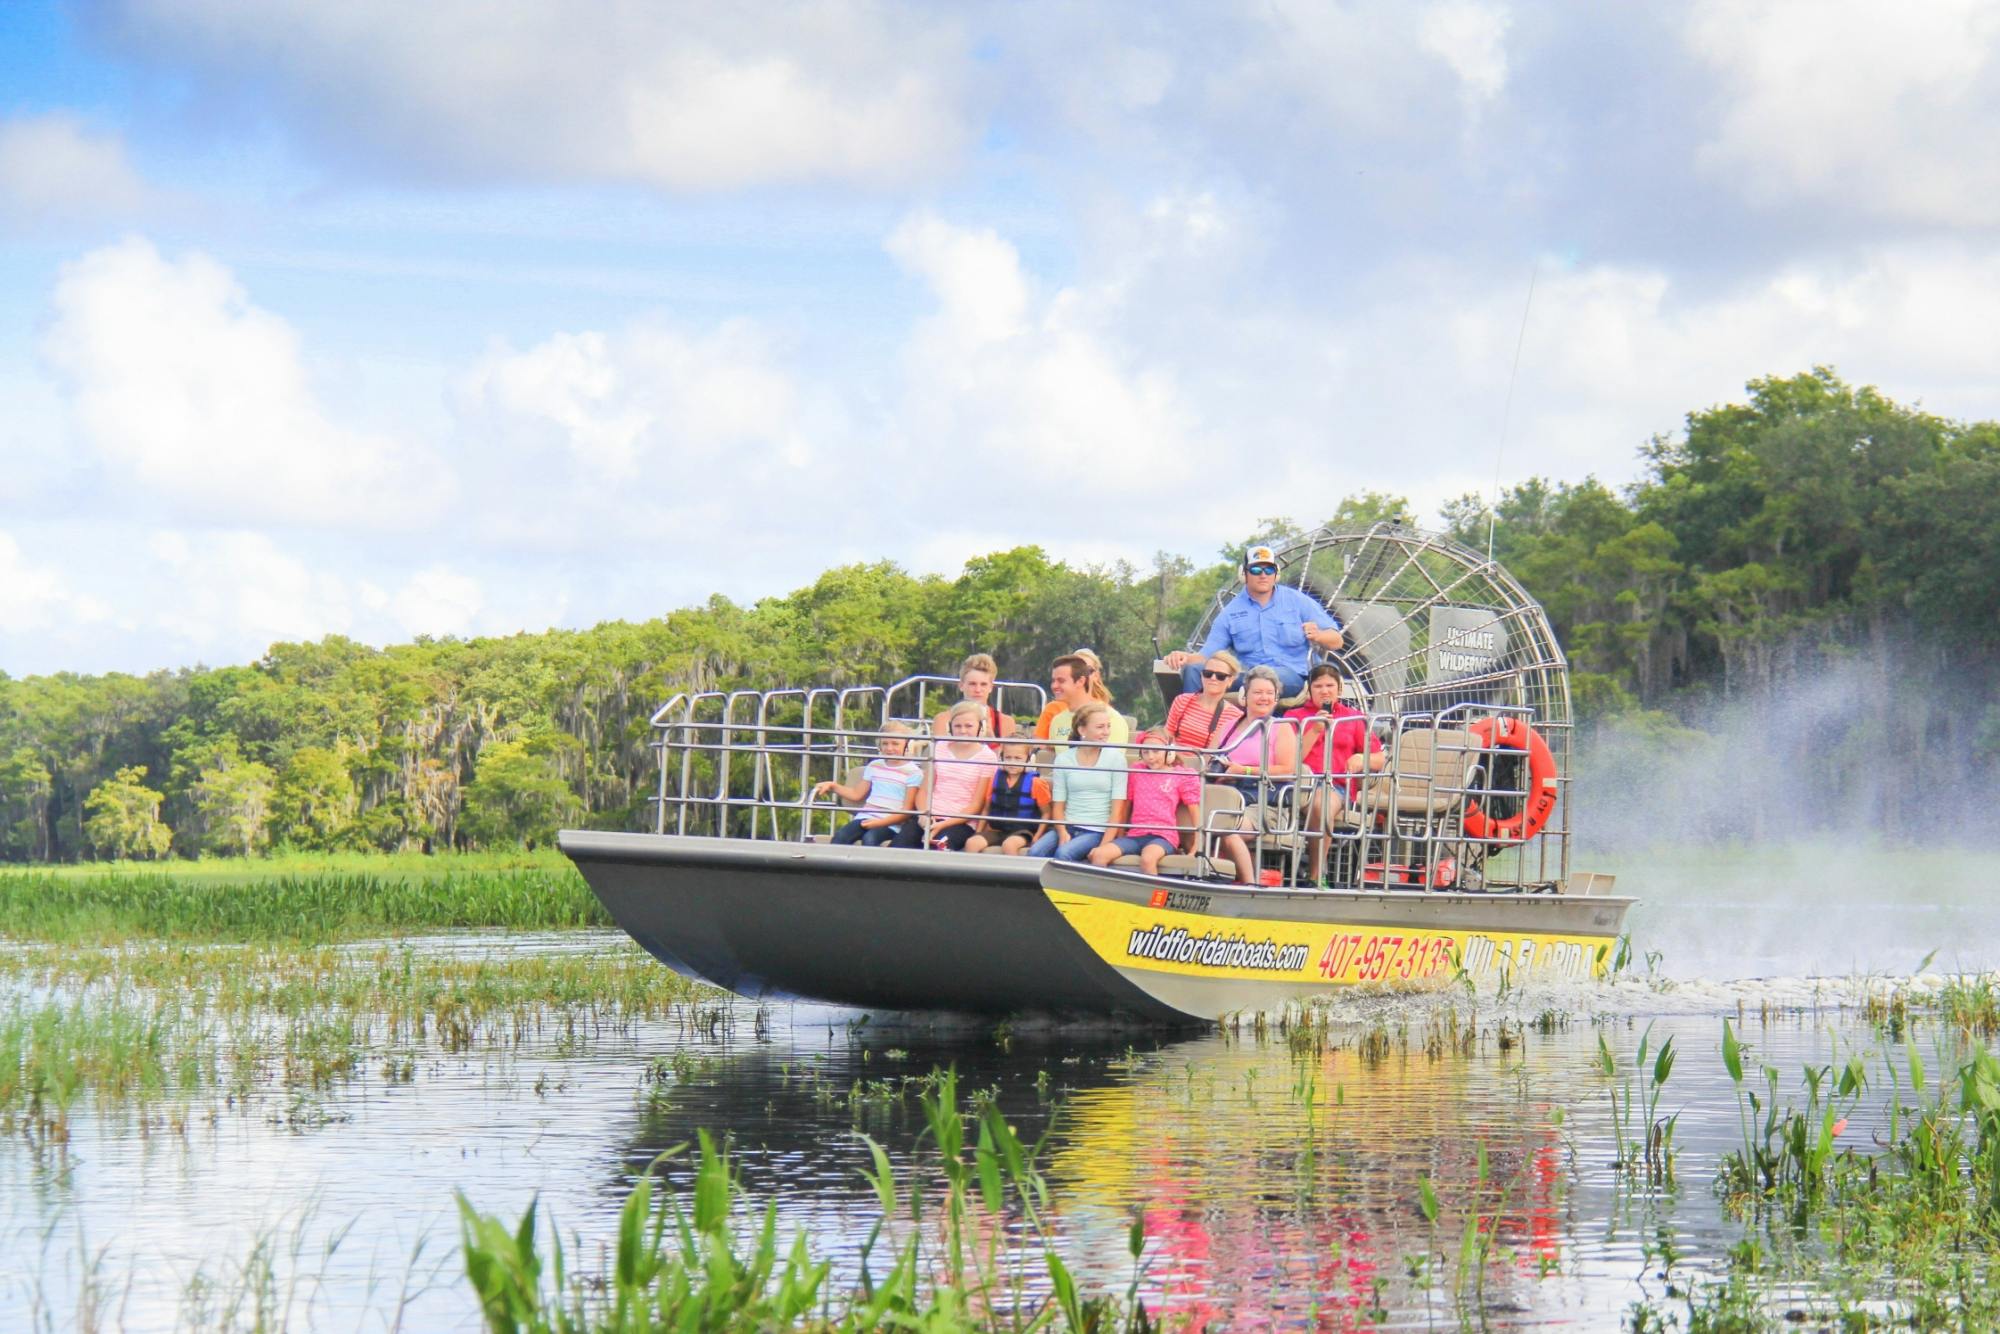 One hour Everglades tour and Safari park combo Musement